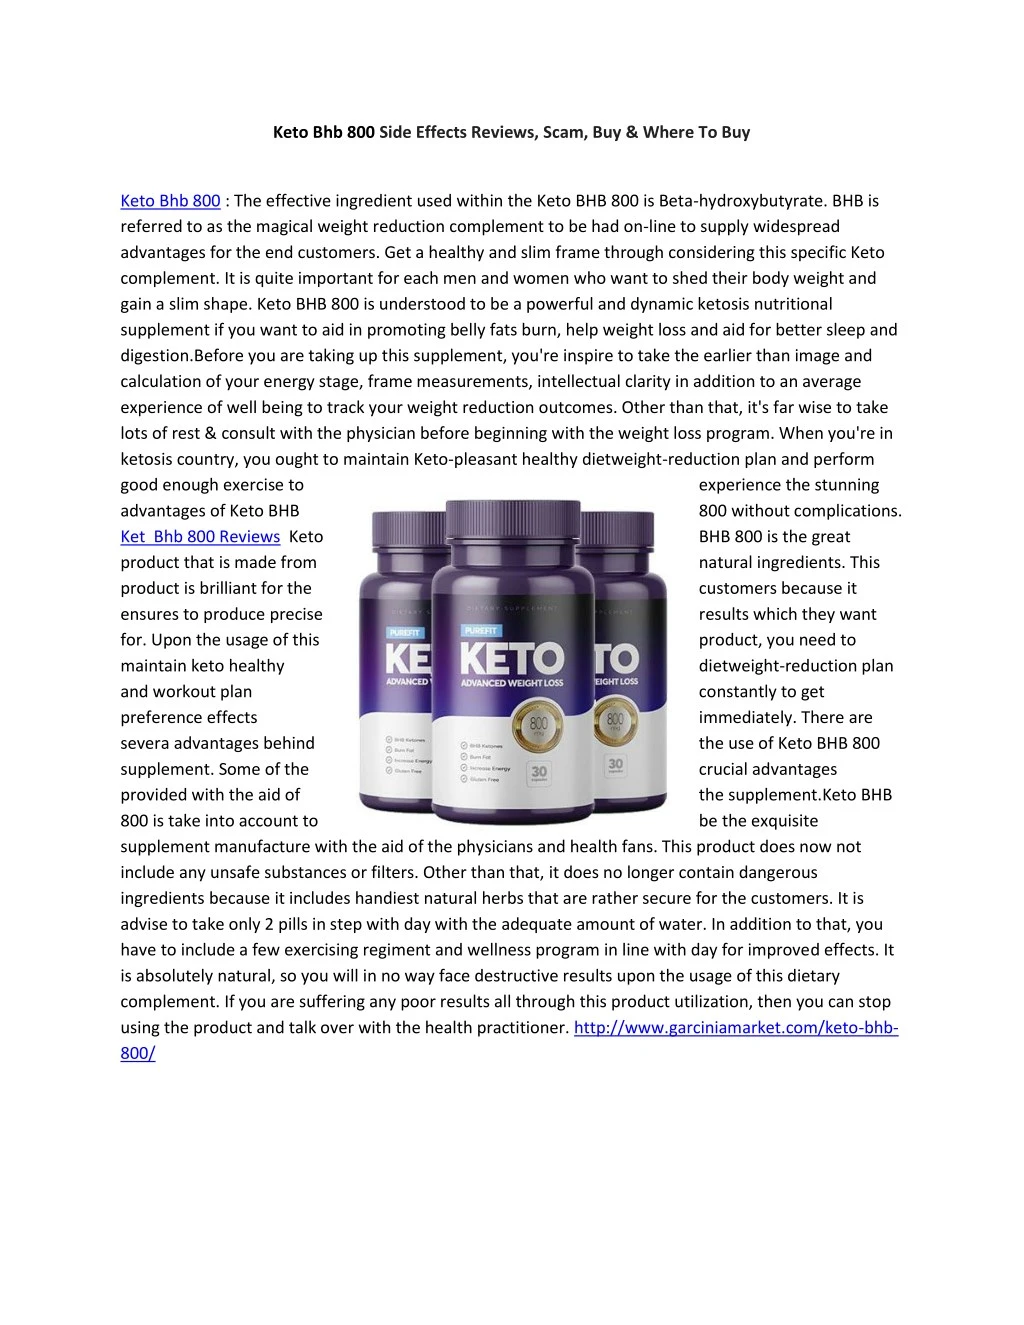 keto bhb 800 side effects reviews scam buy where